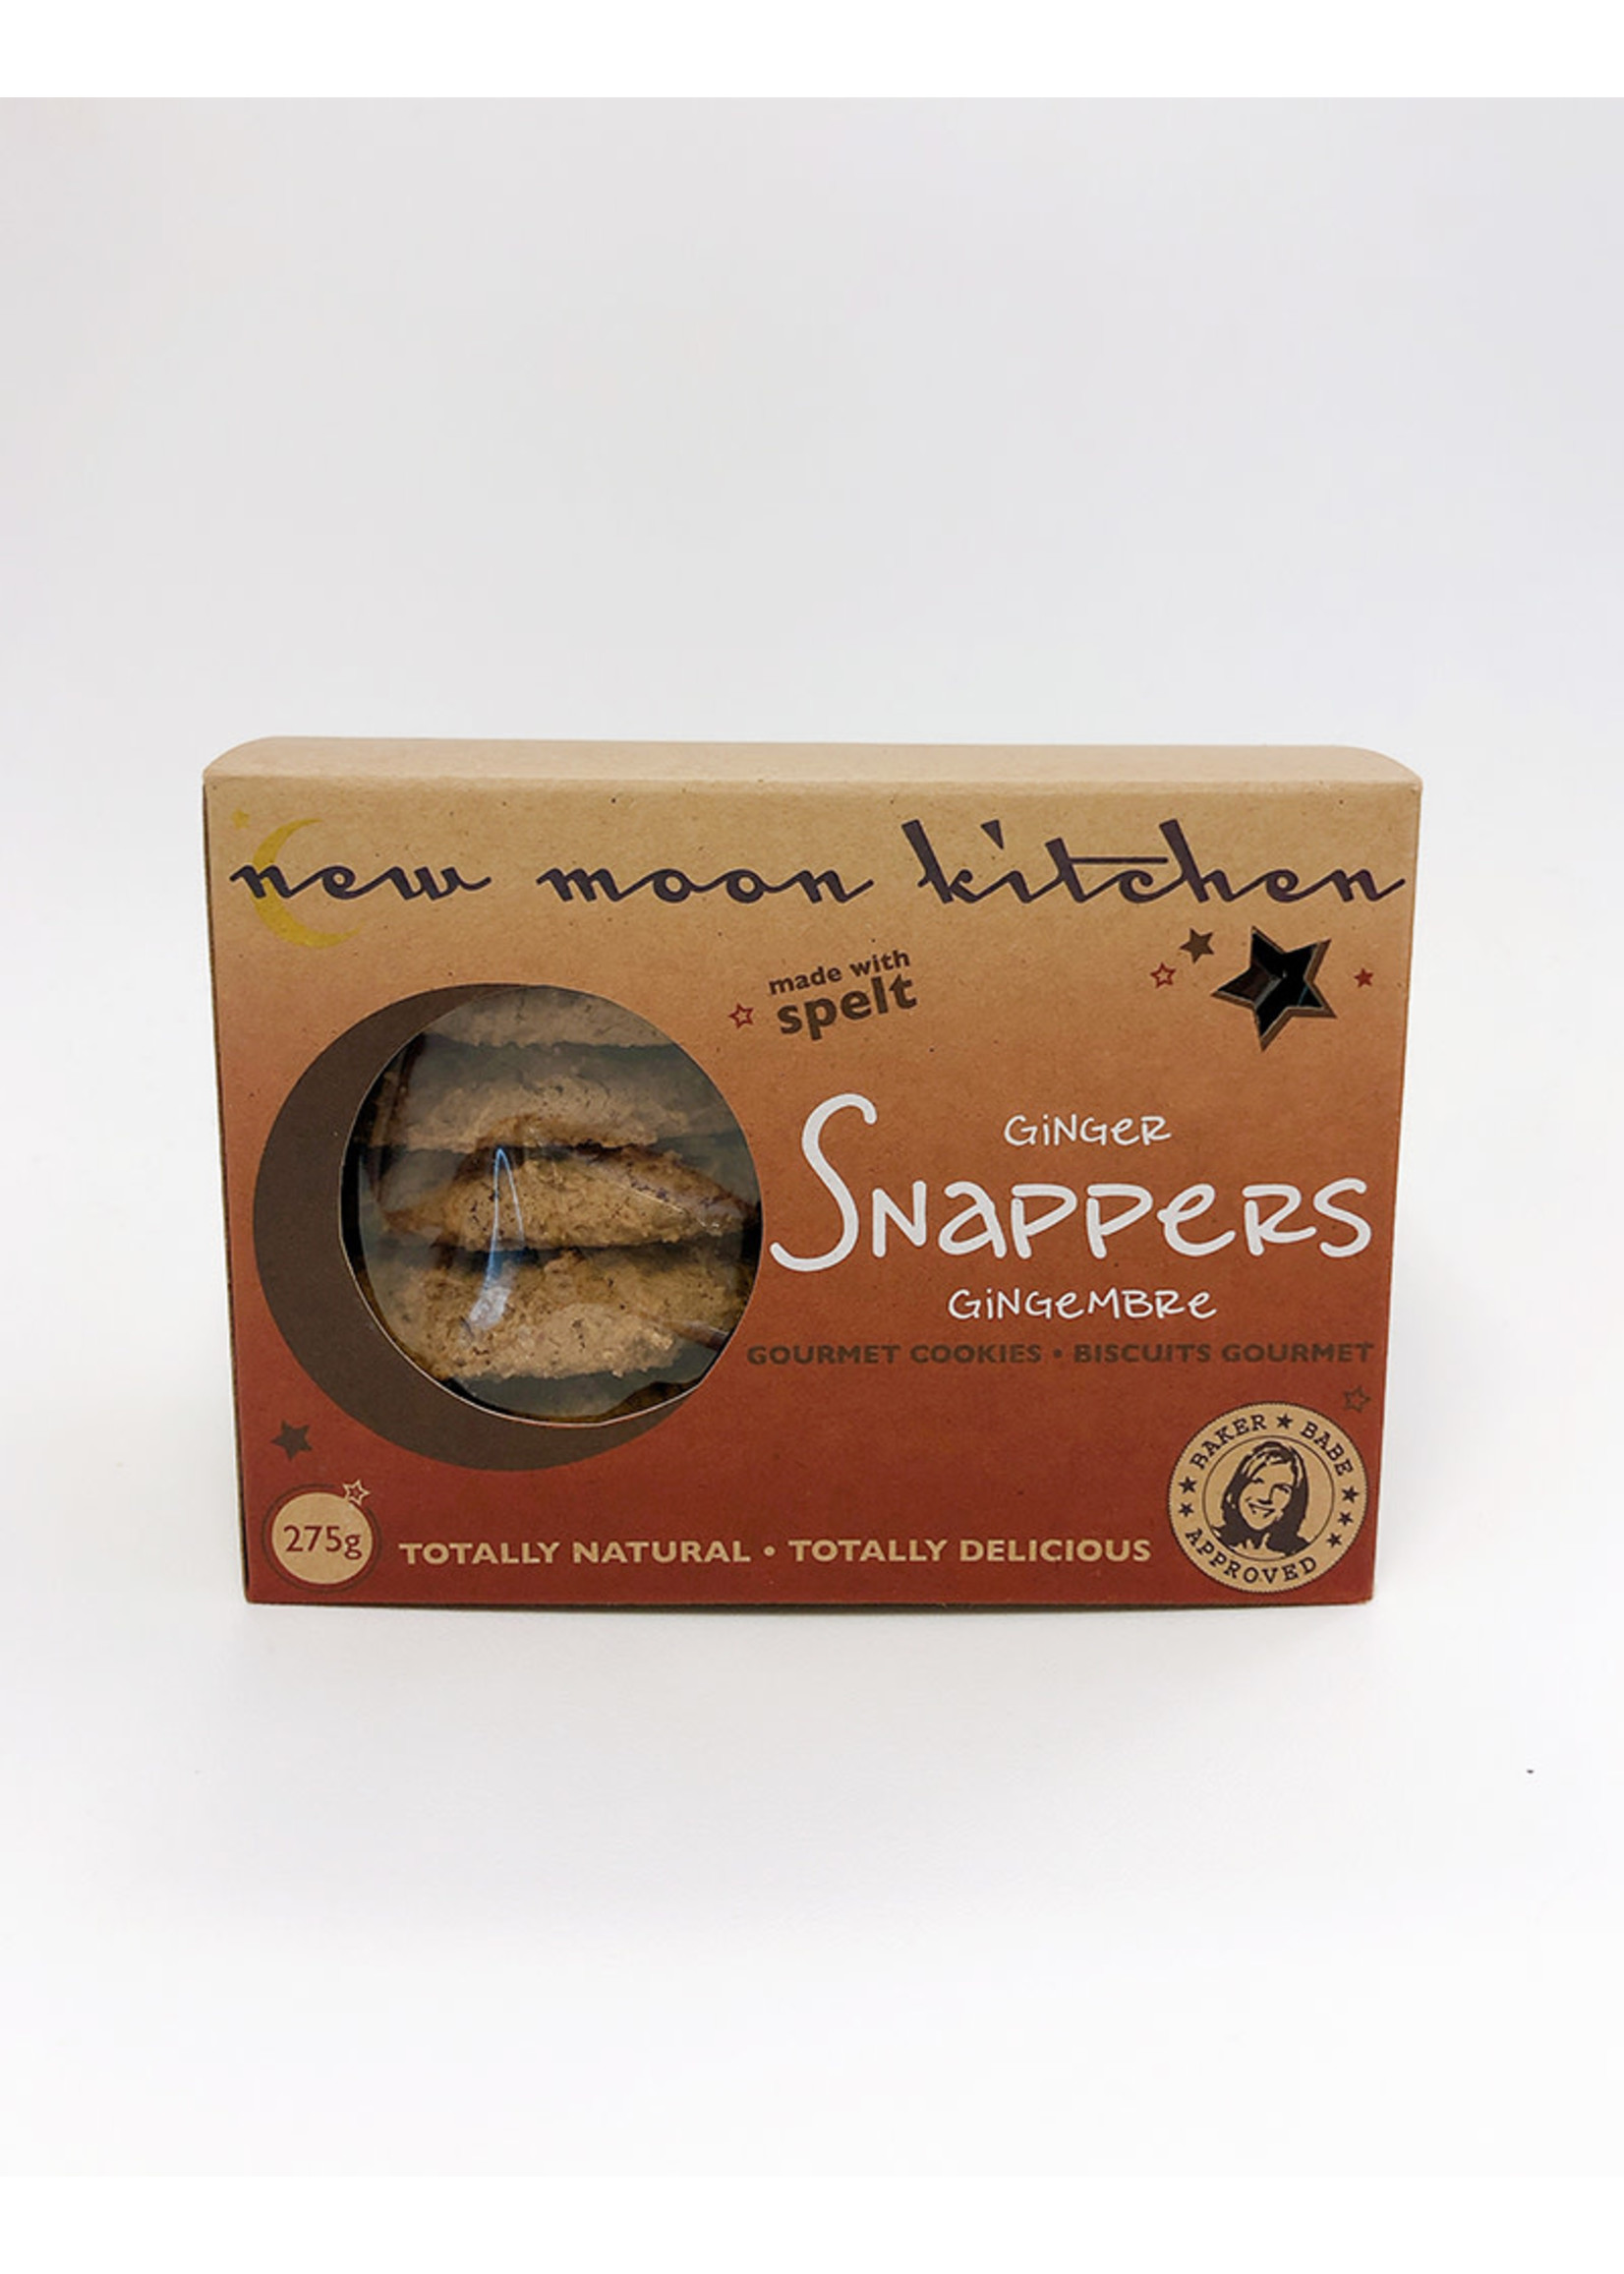 New Moon Kitchen New Moon Kitchen - Cookies, Ginger Snappers (box)